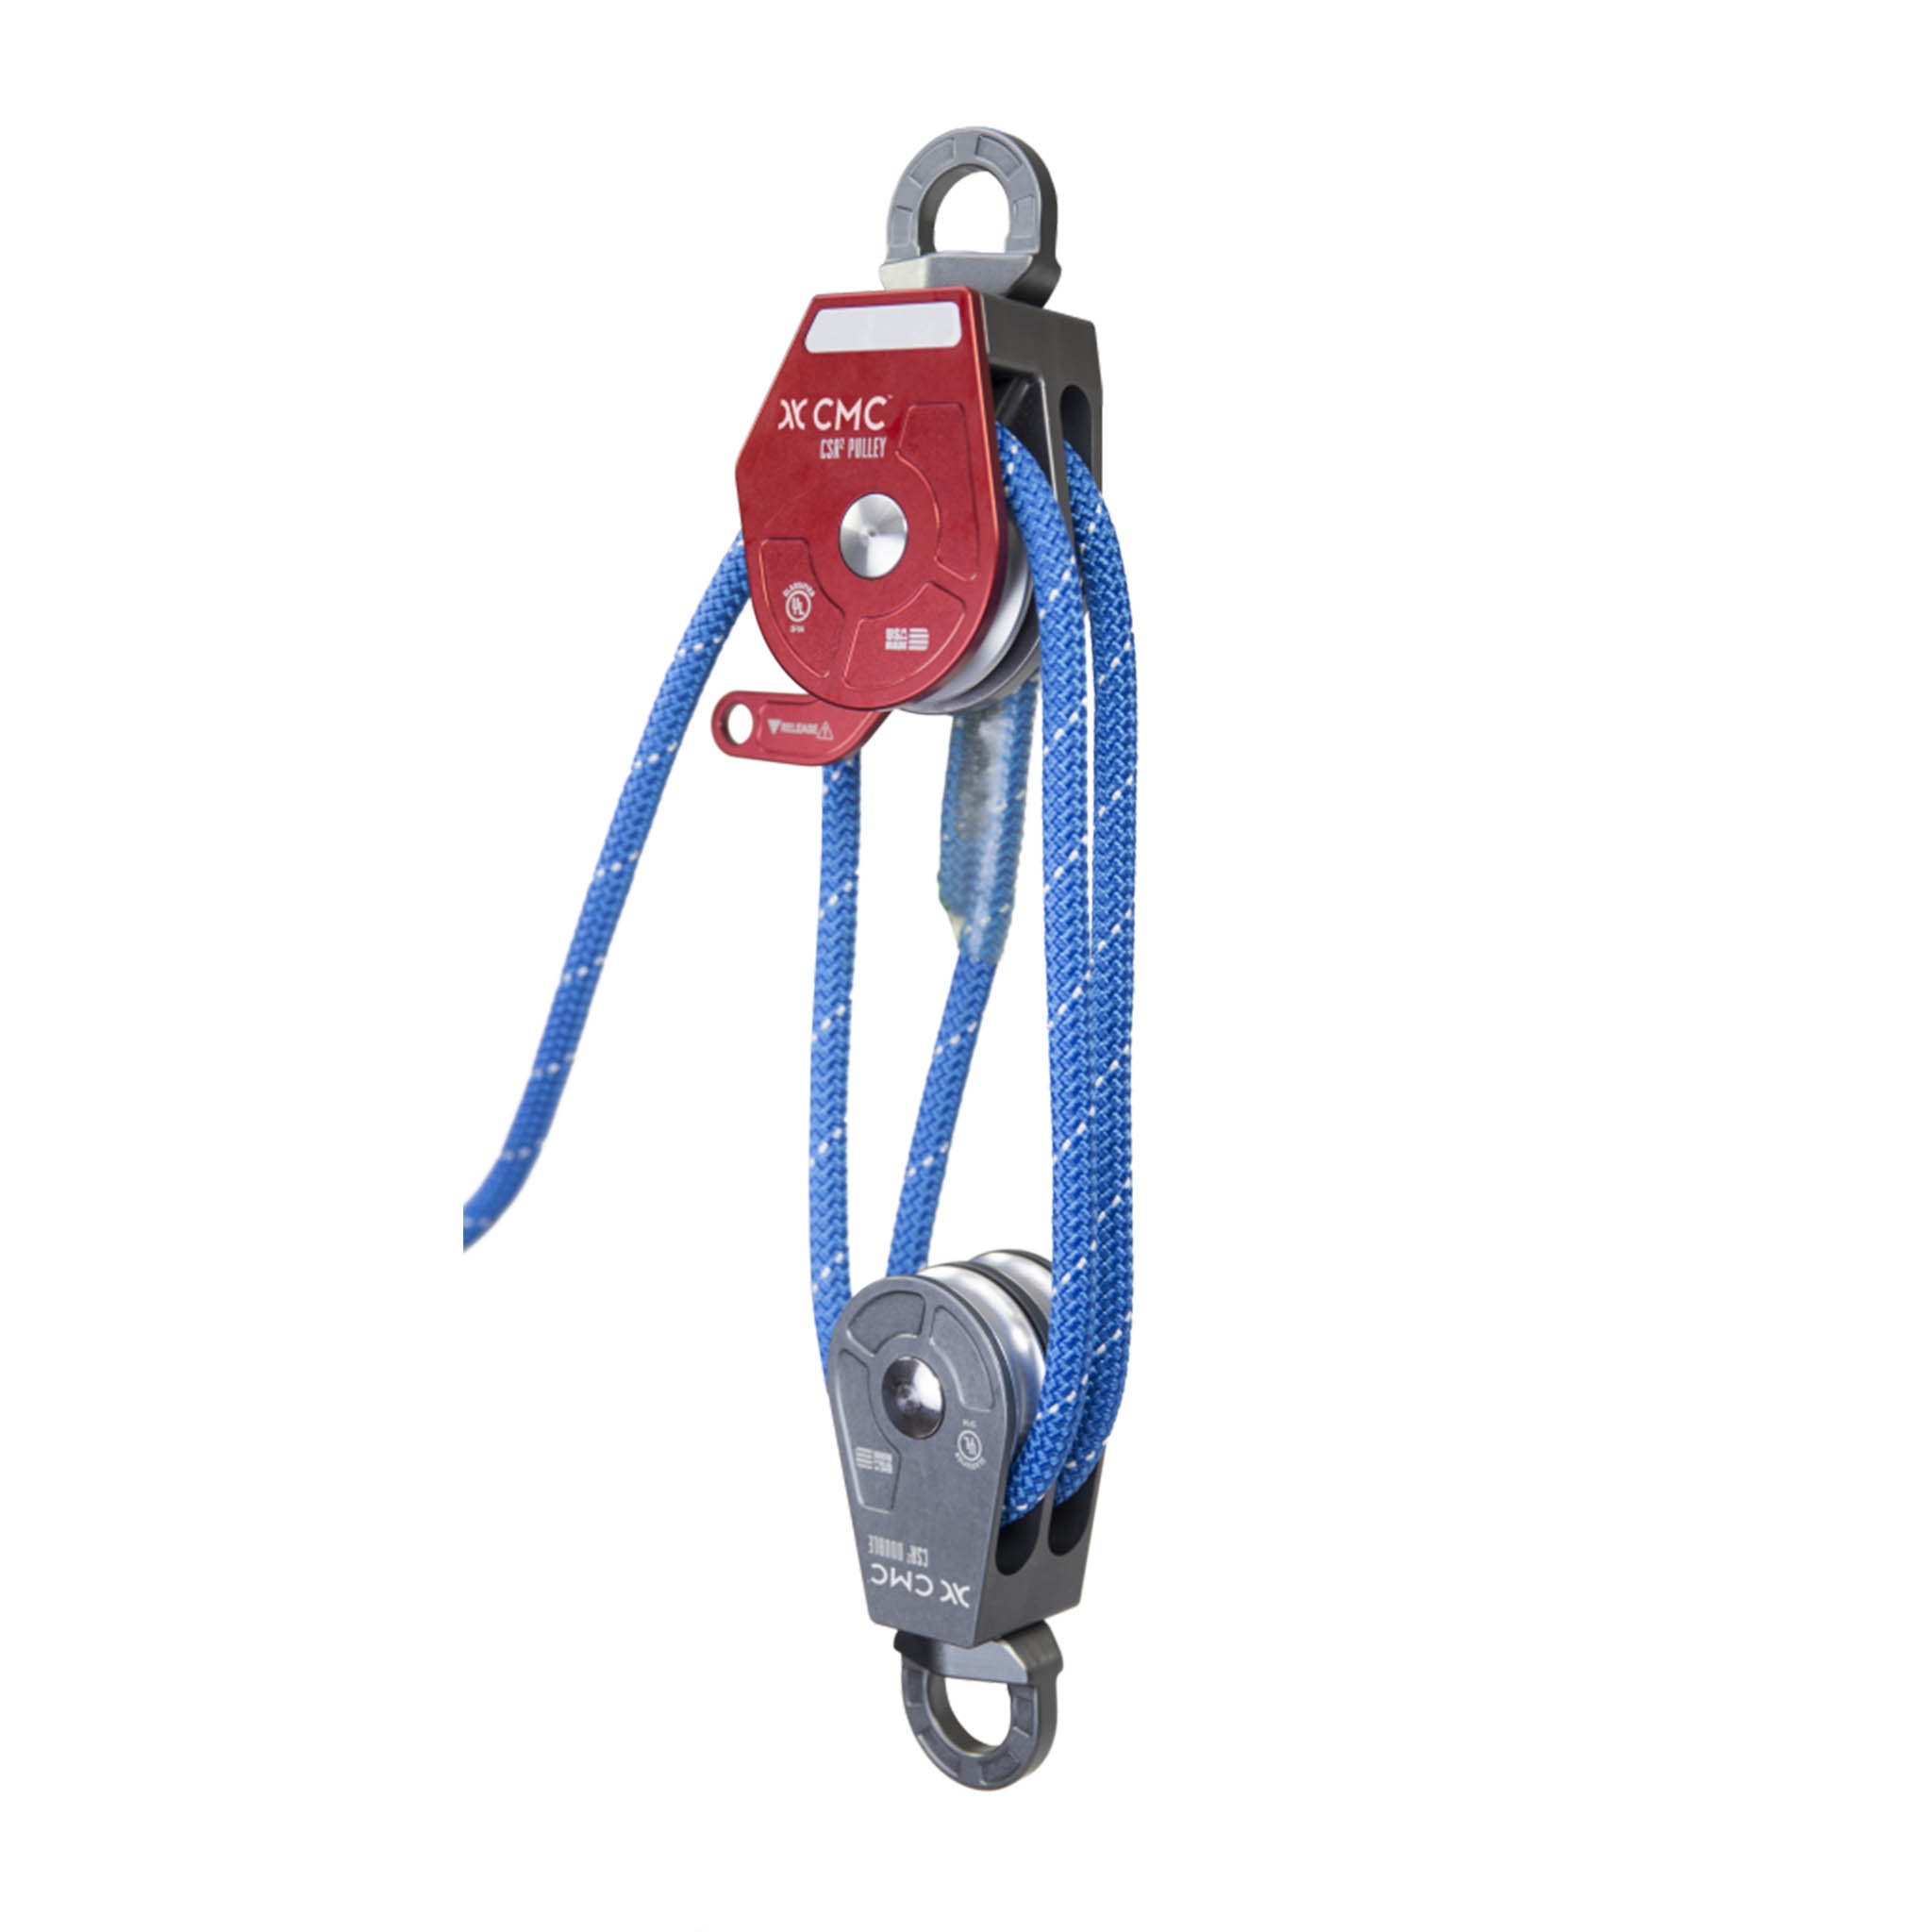 CMC Pro CSR2 Pulley System (NFPA G Rated) – T'NT Work & Rescue